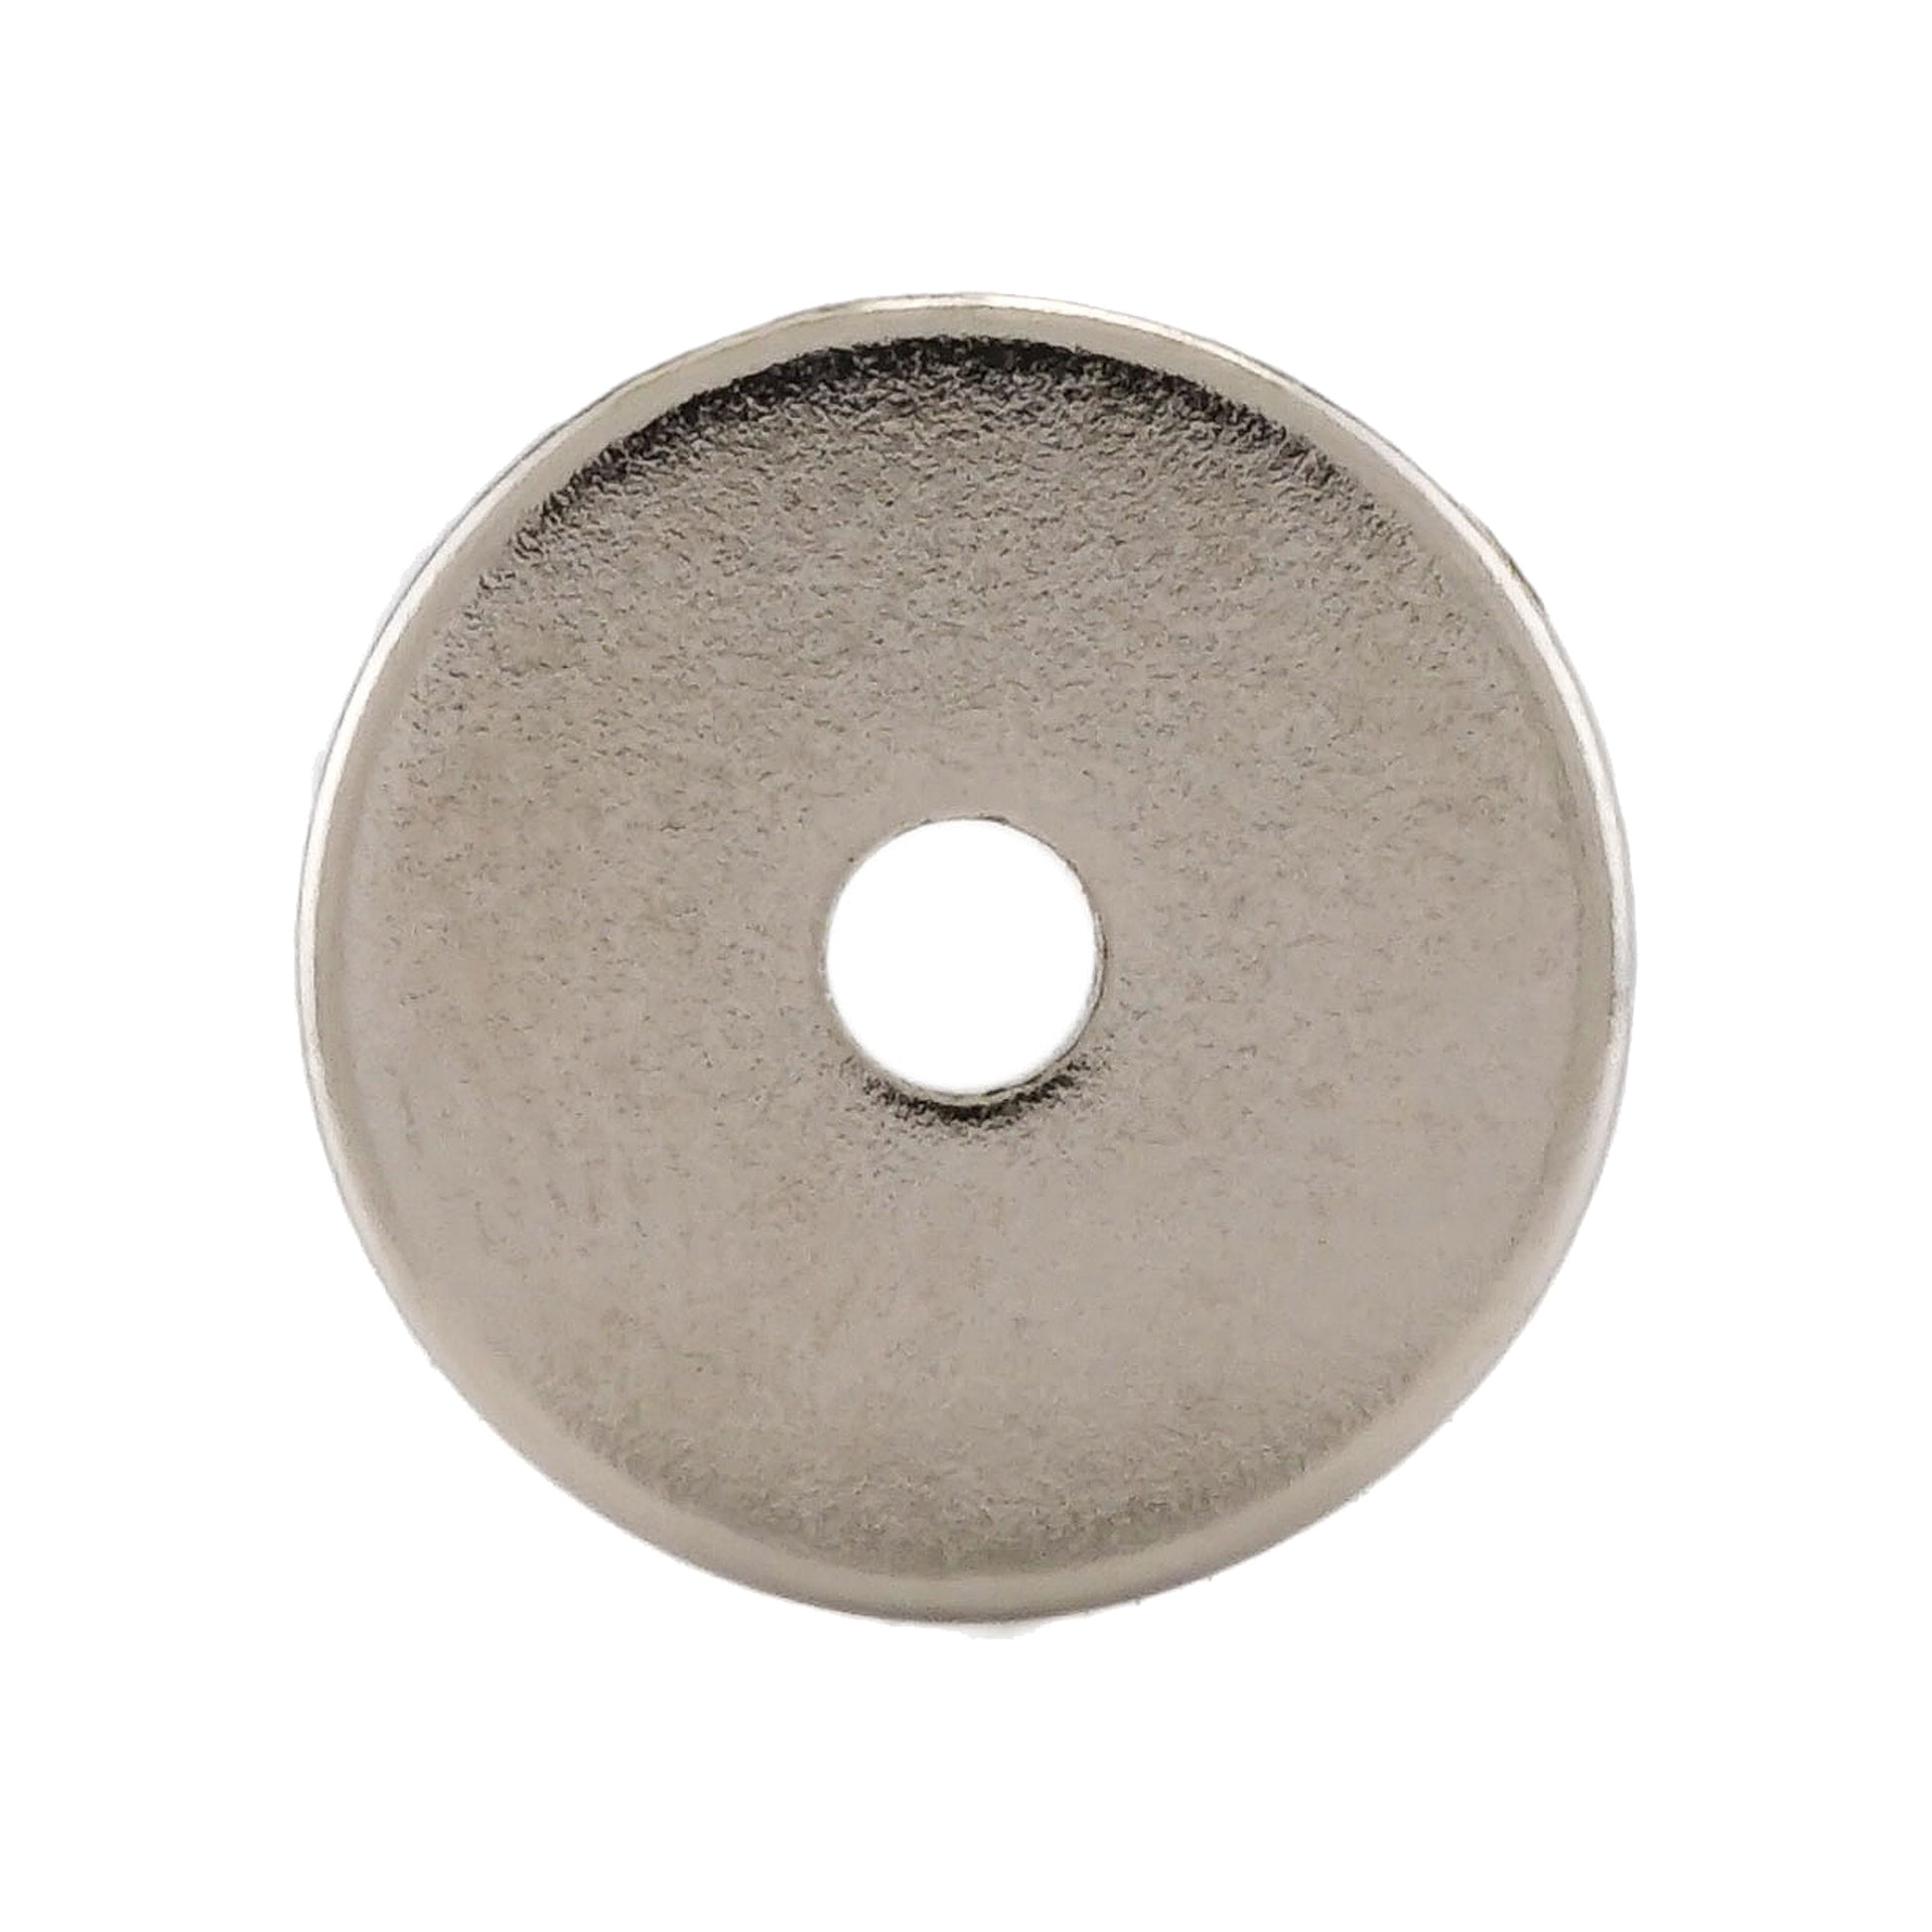 Load image into Gallery viewer, NR006206NS01 Neodymium Ring Magnet - Top View